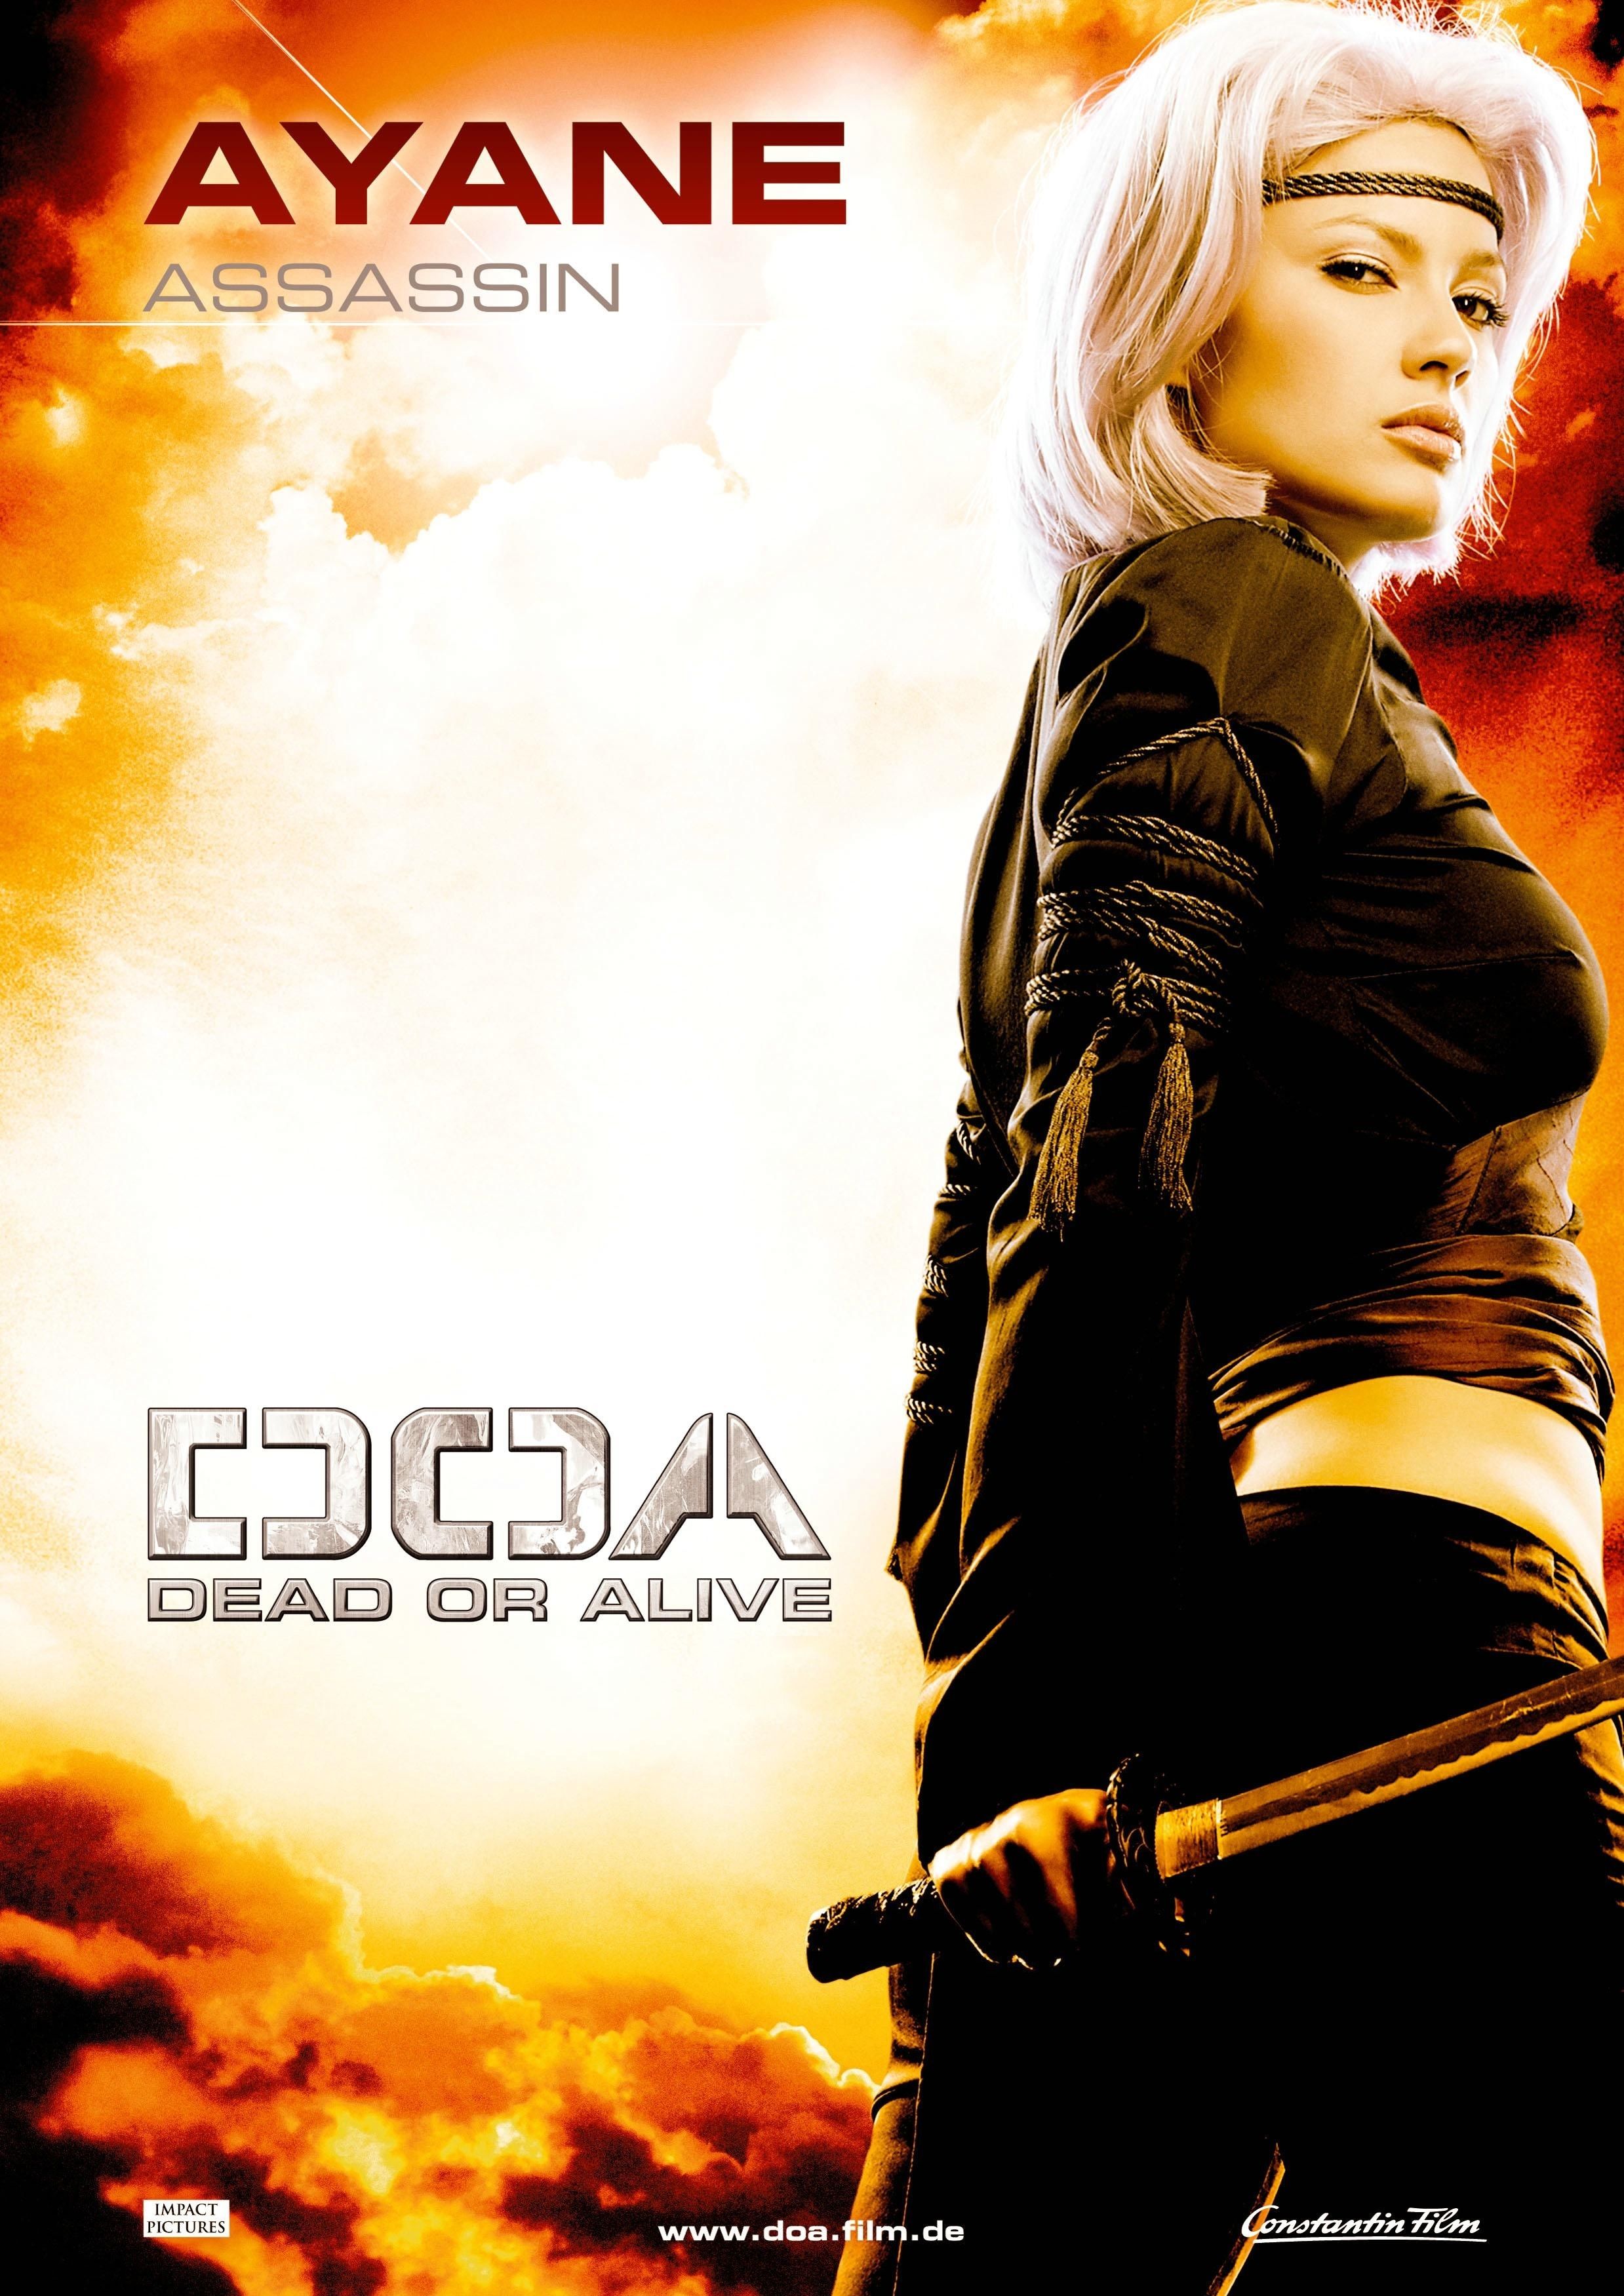 betty brumm recommends Doa Dead Or Alive Full Movie